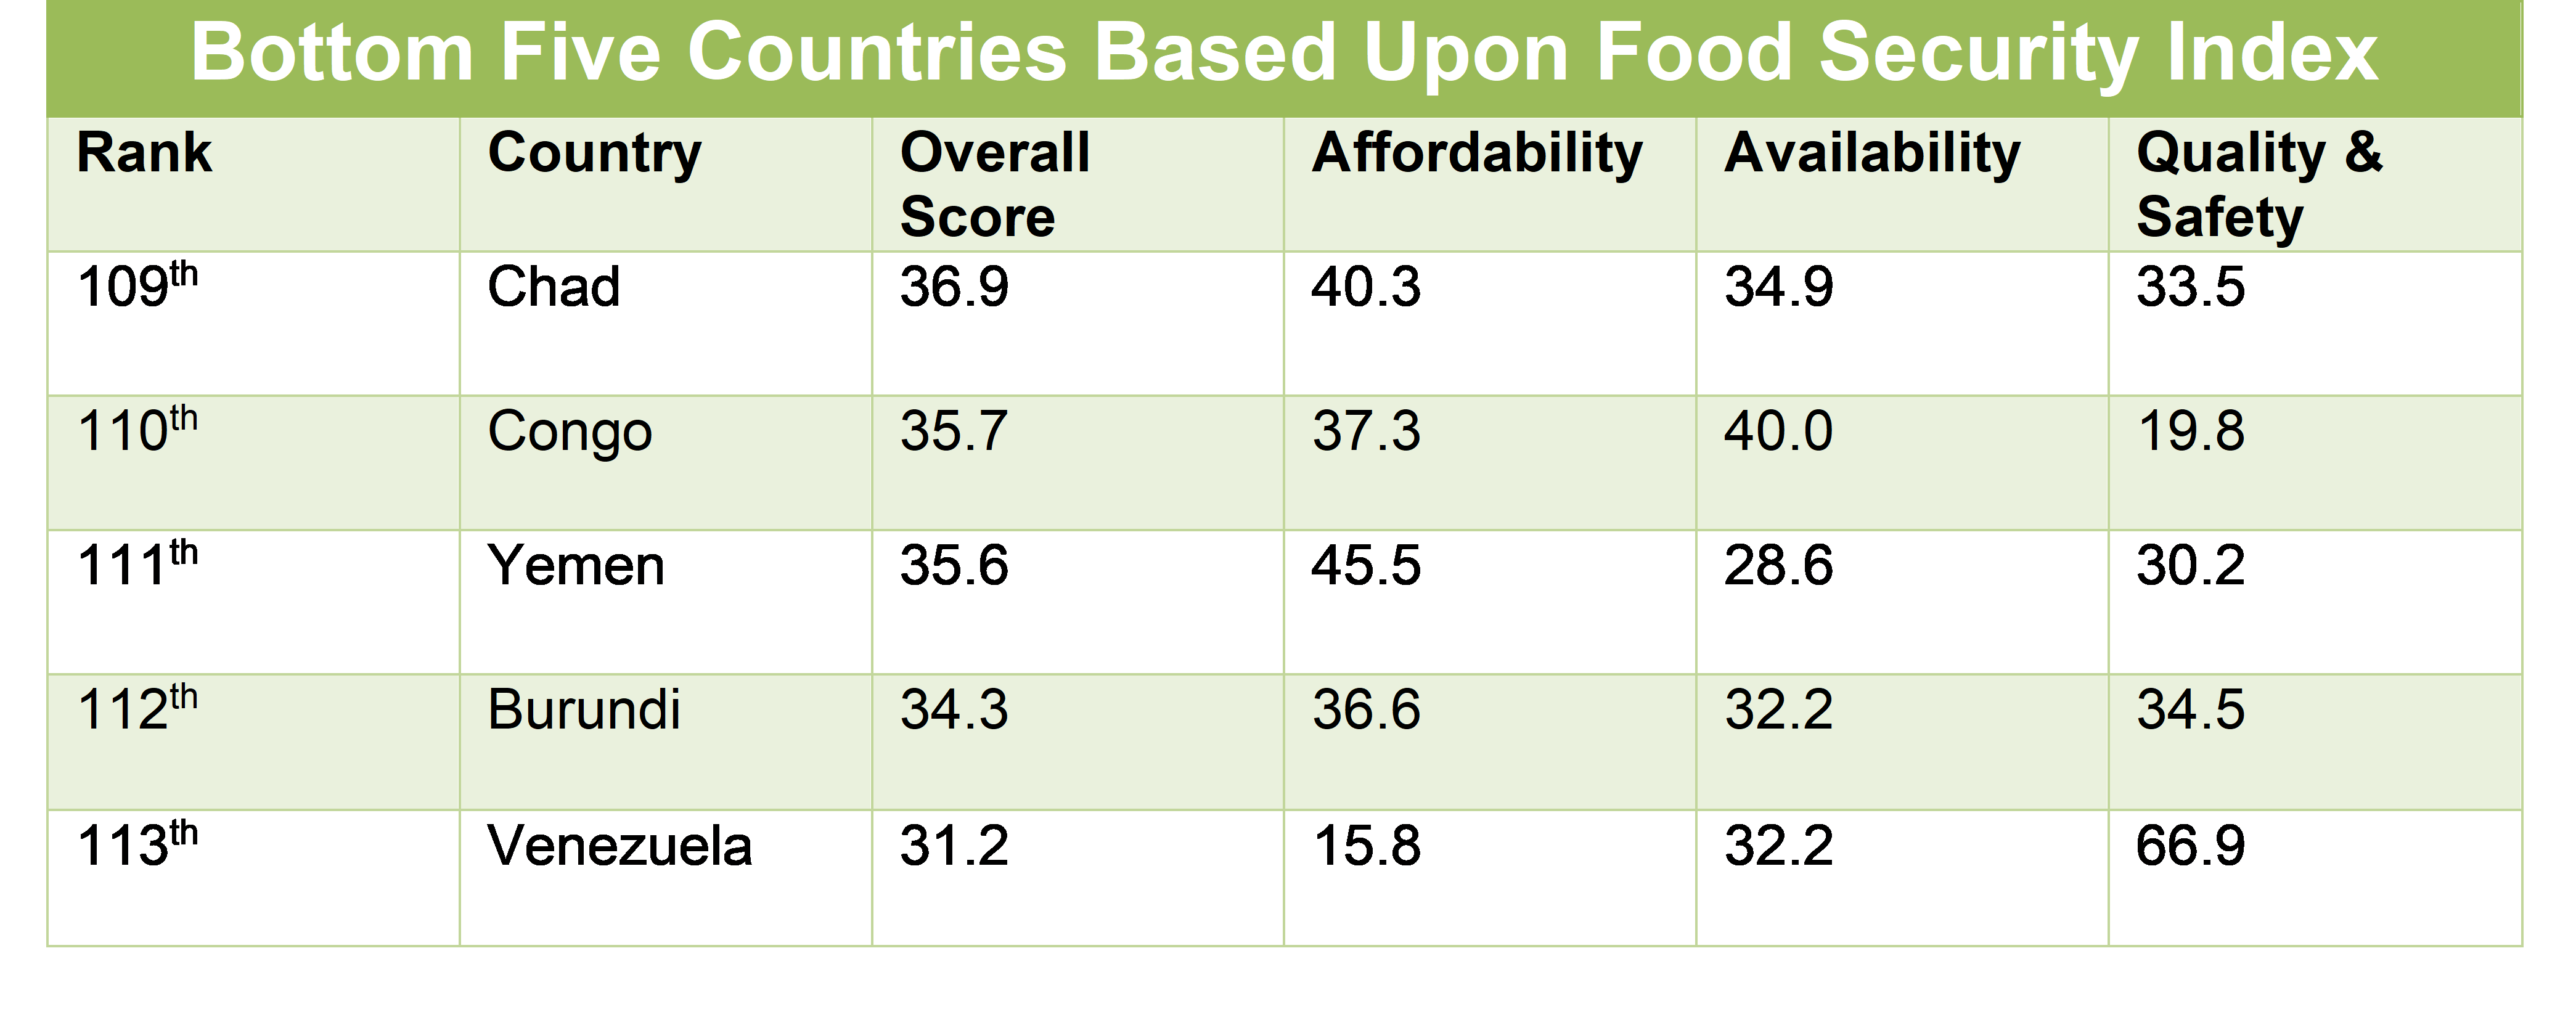 Bottom Five Countries Based Upon the Food Security Index